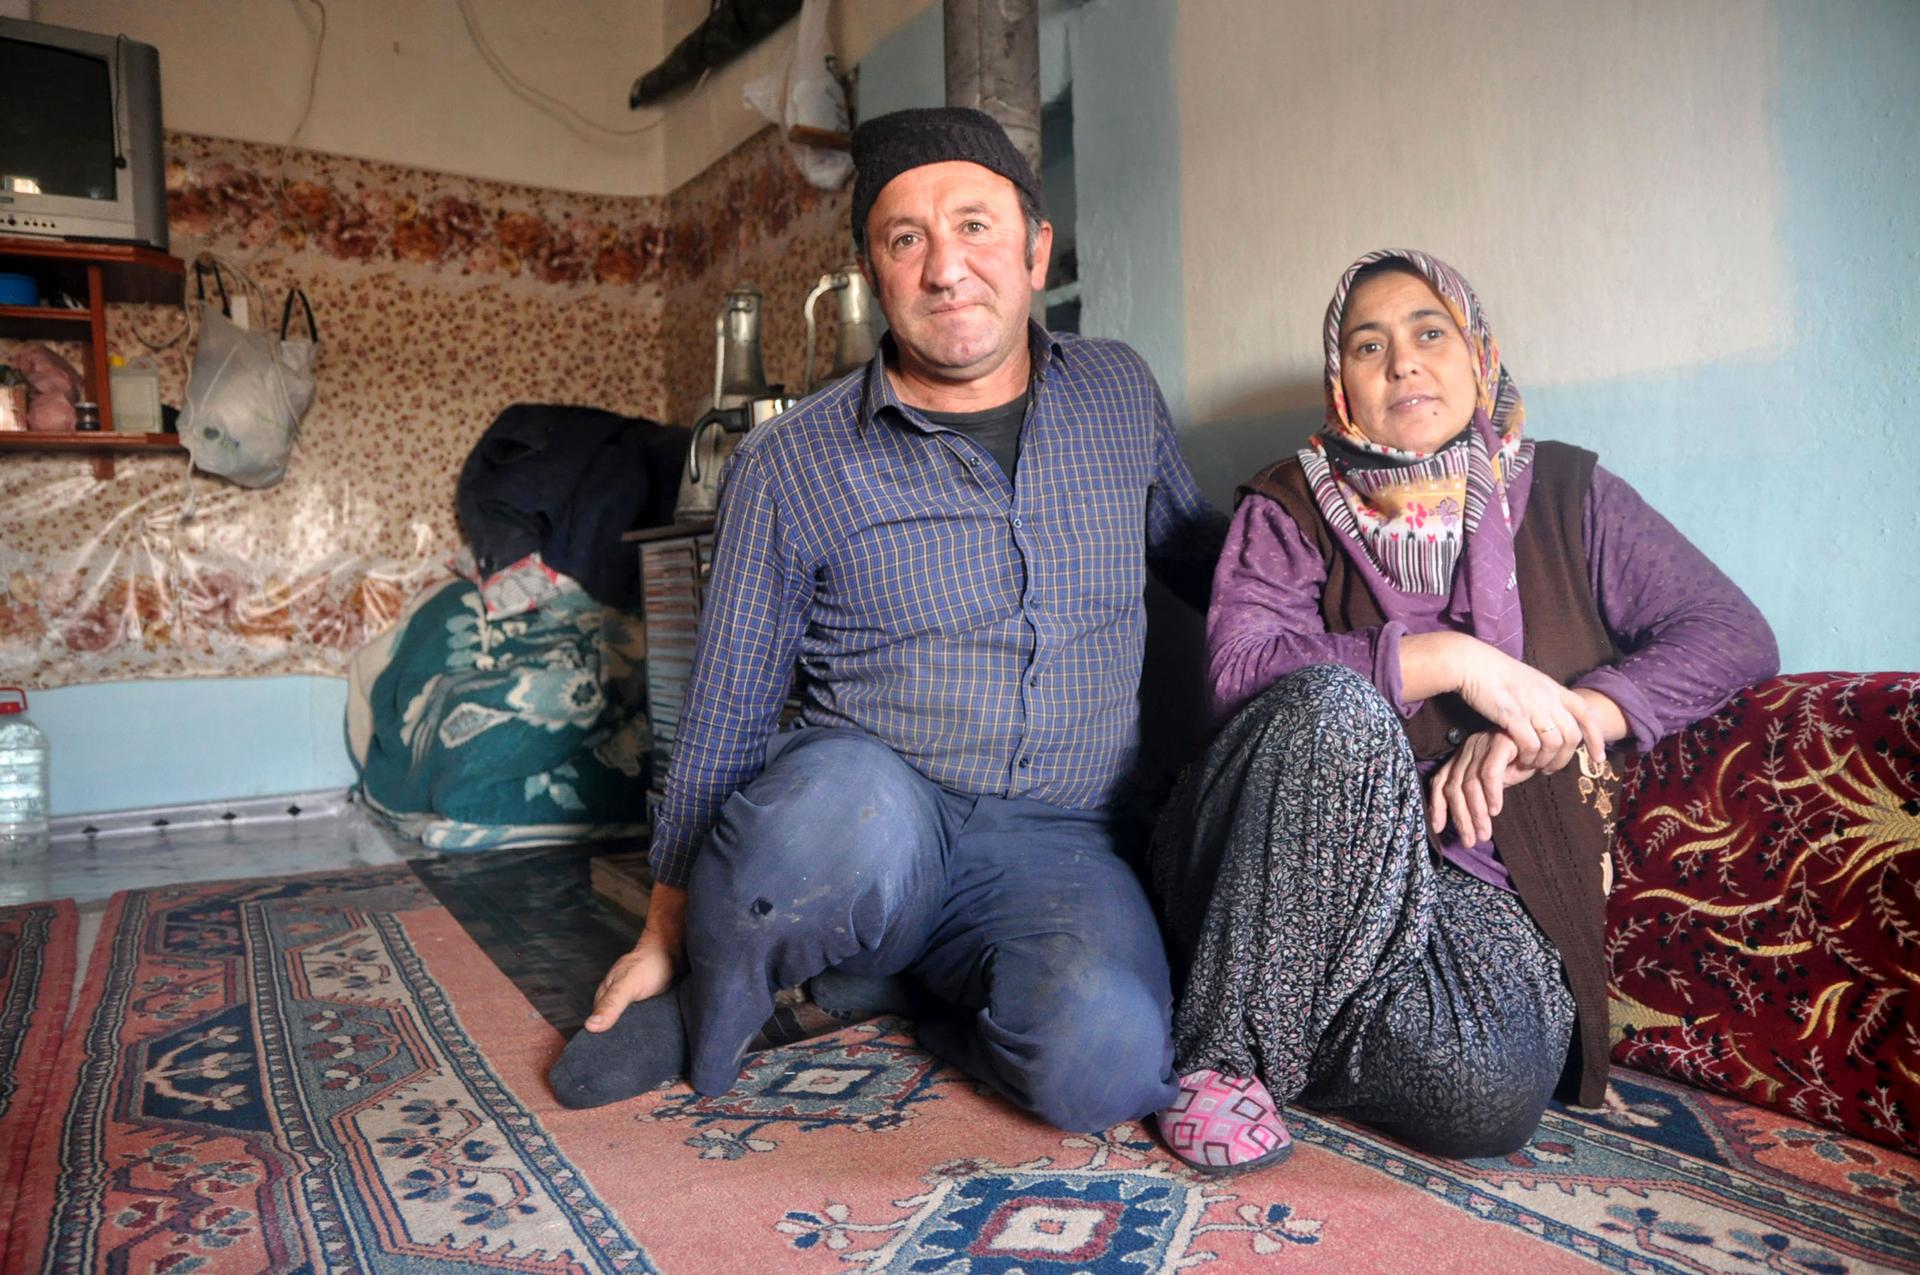 Cafer Ata and his wife, Atiye, at their home in a village near the town of Karapinar.